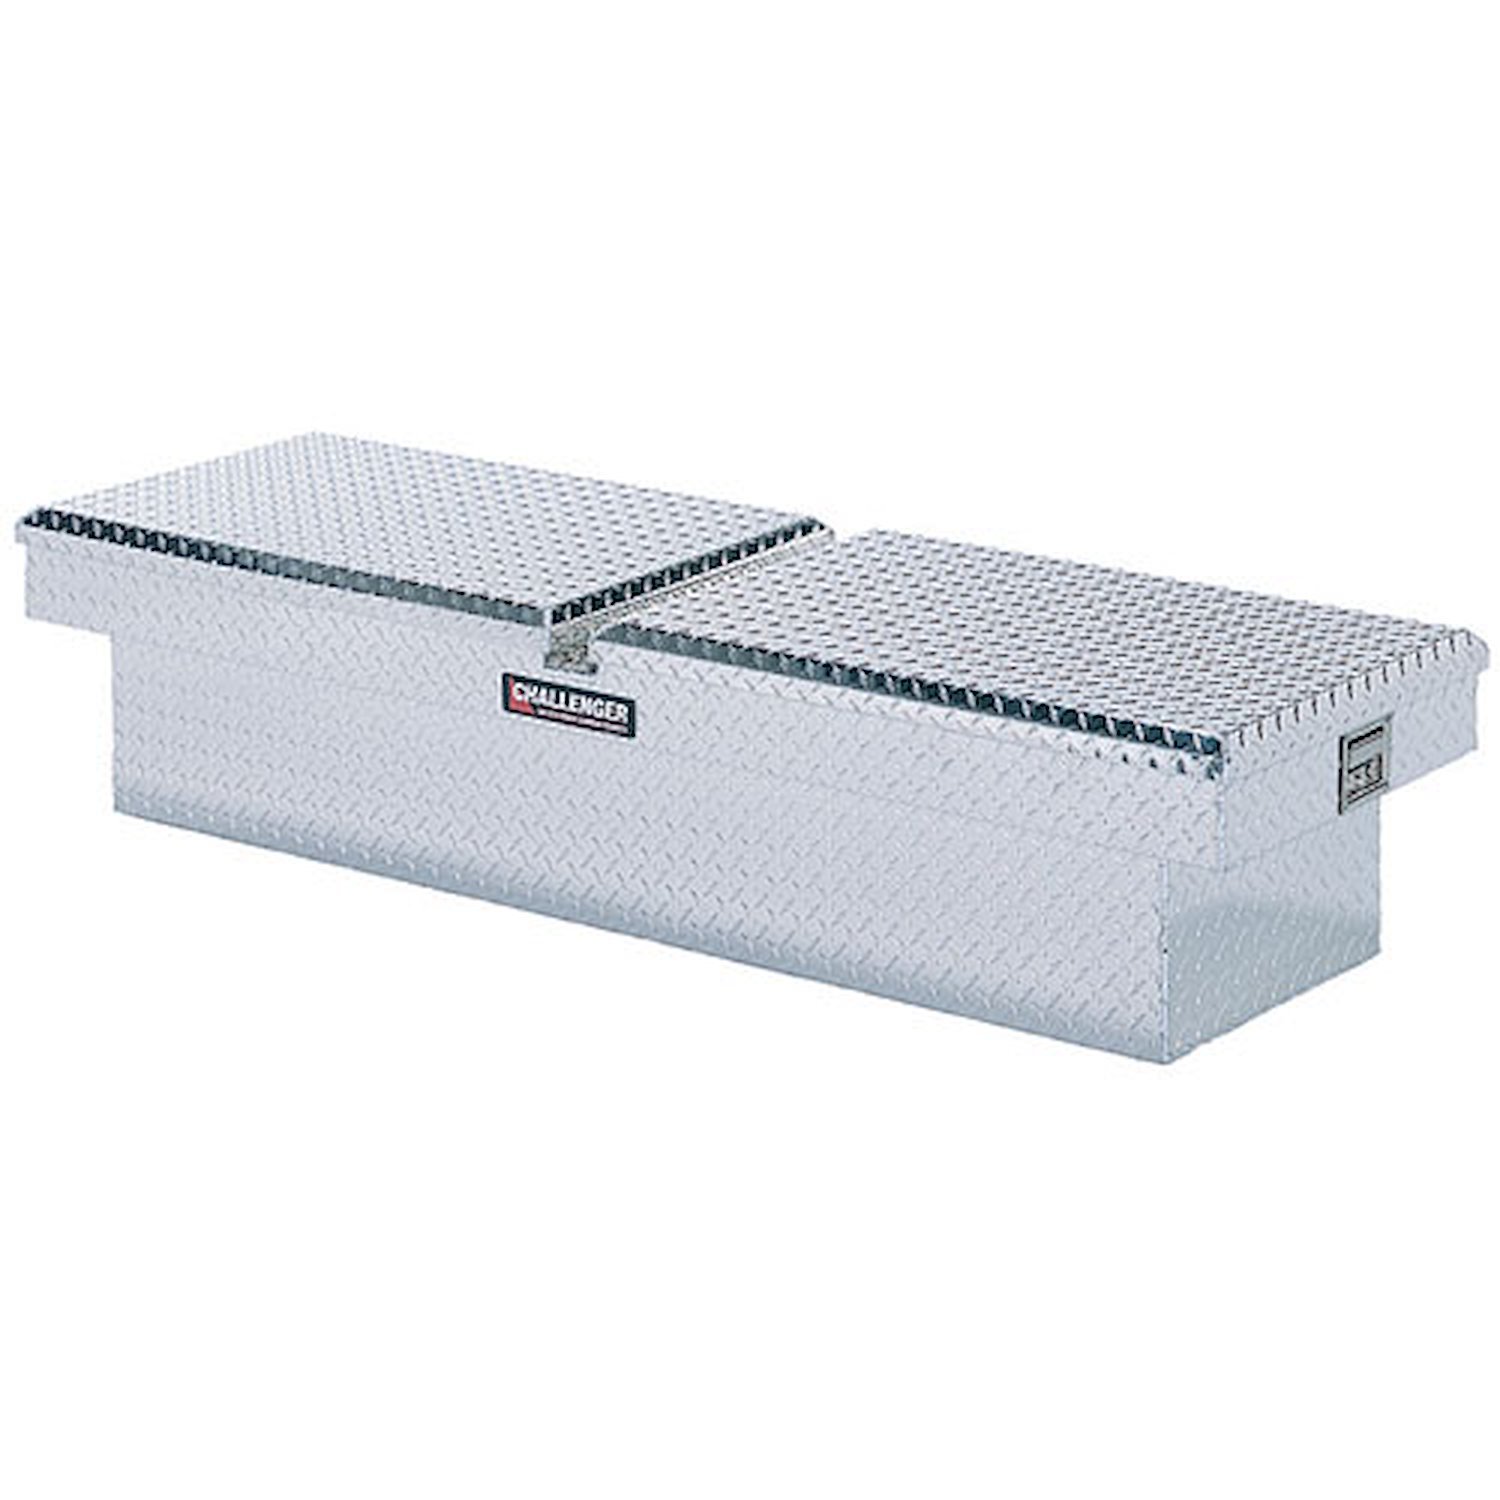 Truck Bed Challenger Tool Box Length: 63.25